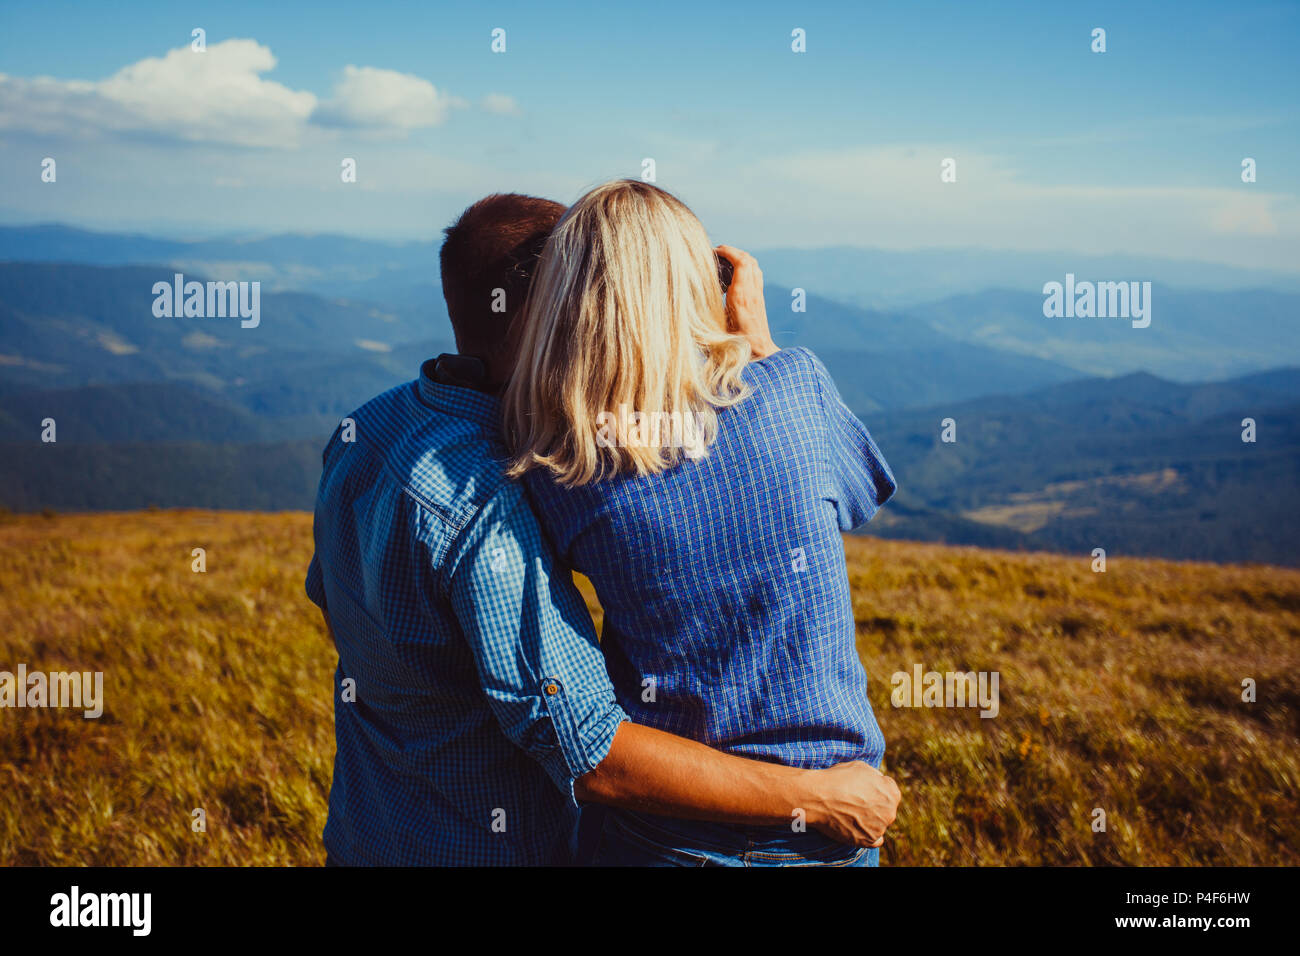 Sweet trip for two Stock Photo